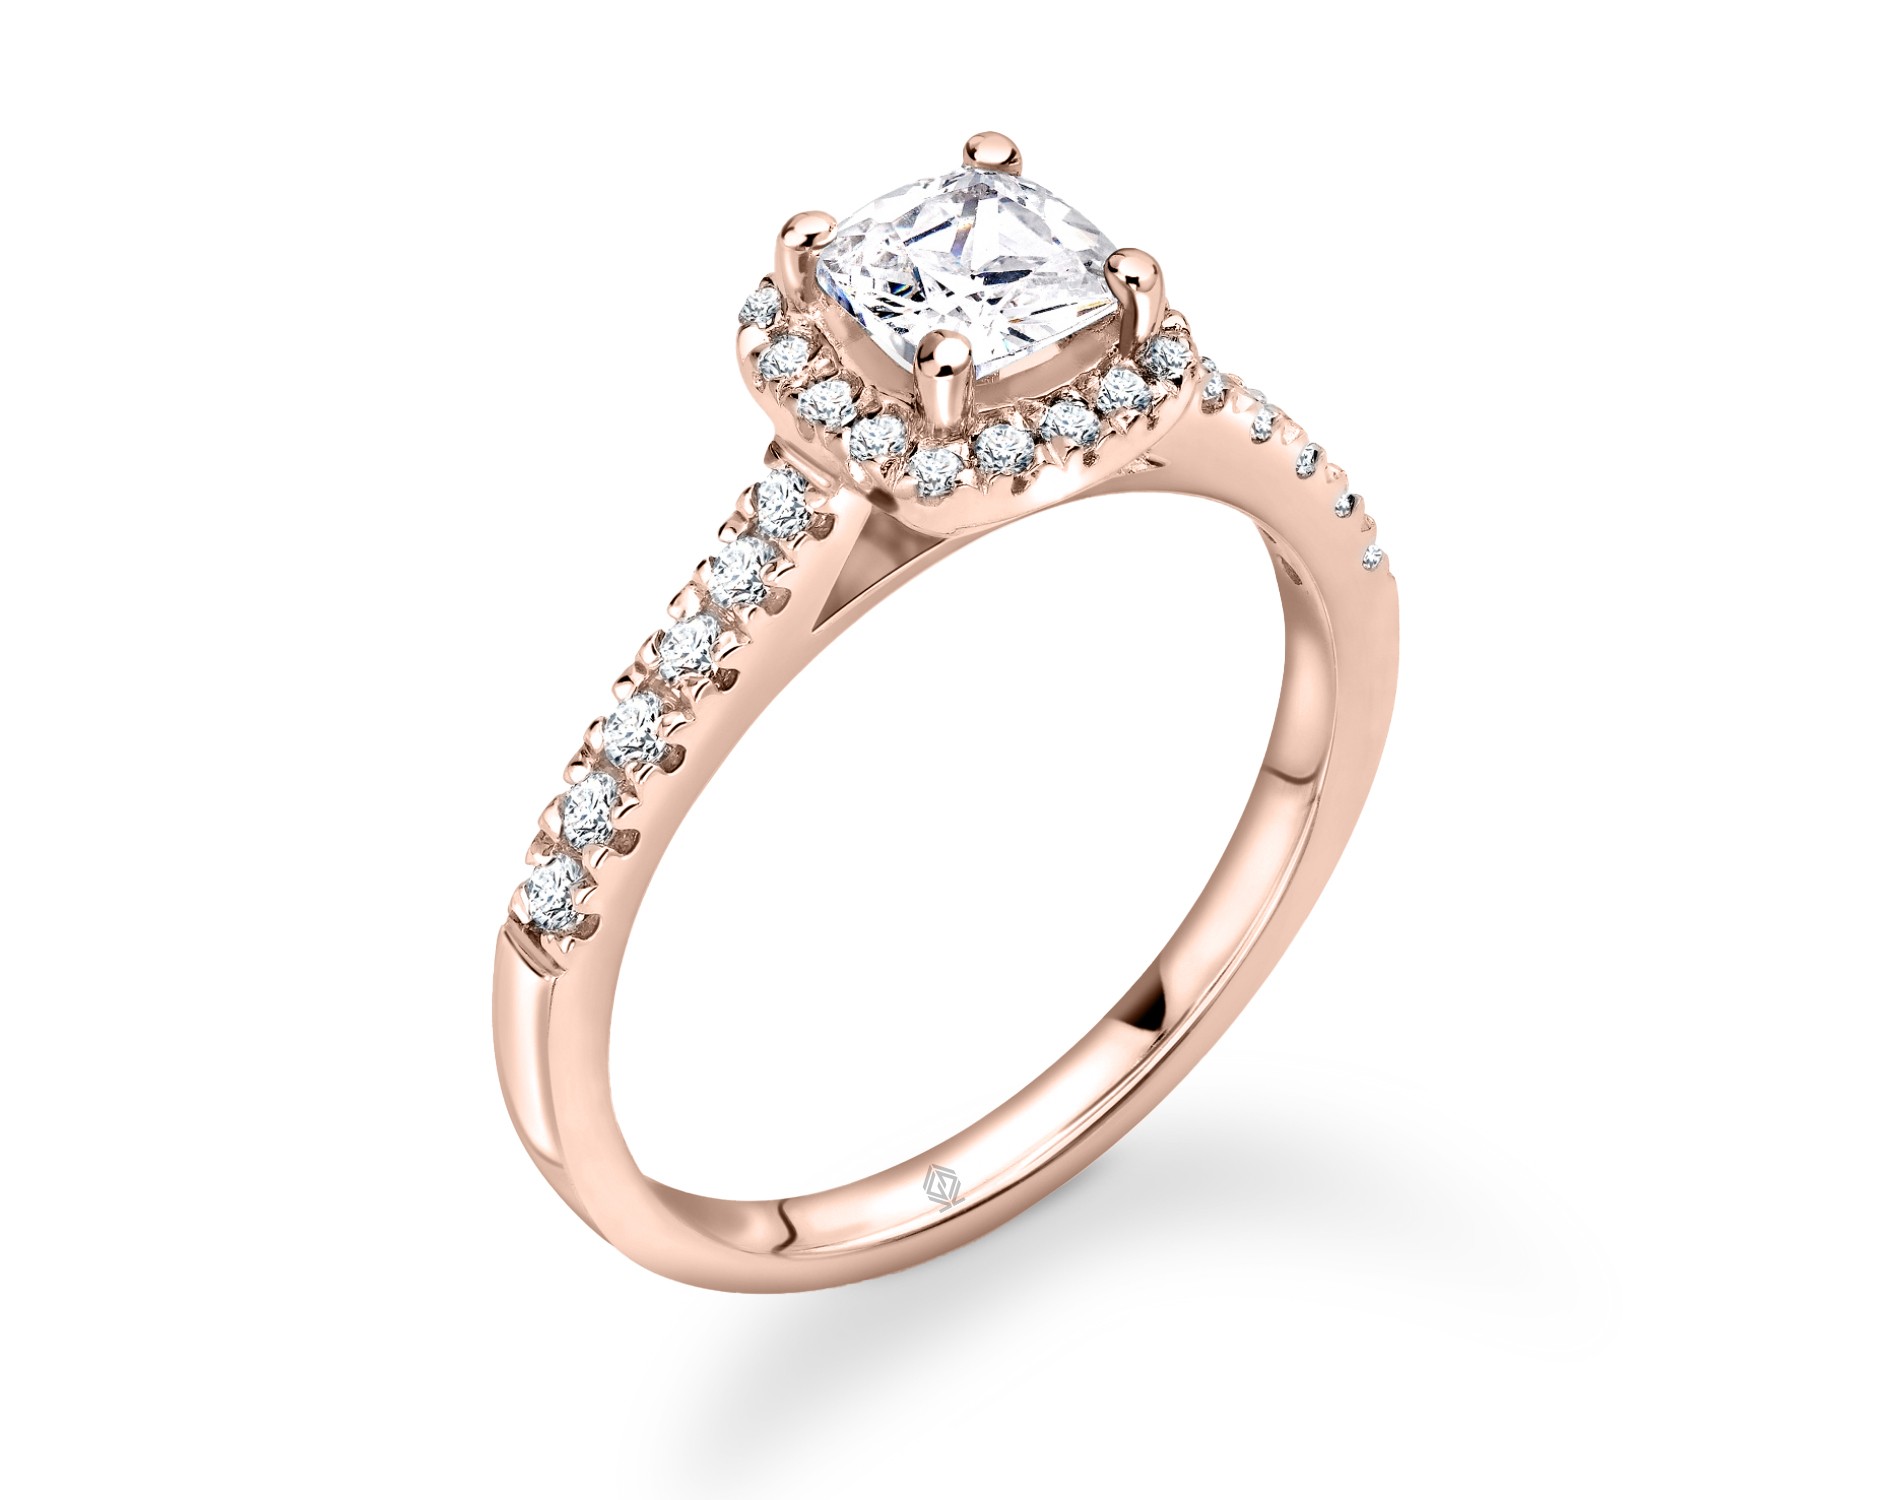 18K ROSE GOLD HALO CUSHION CUT DIAMOND ENGAGEMENT RING WITH SIDE STONES PAVE SET